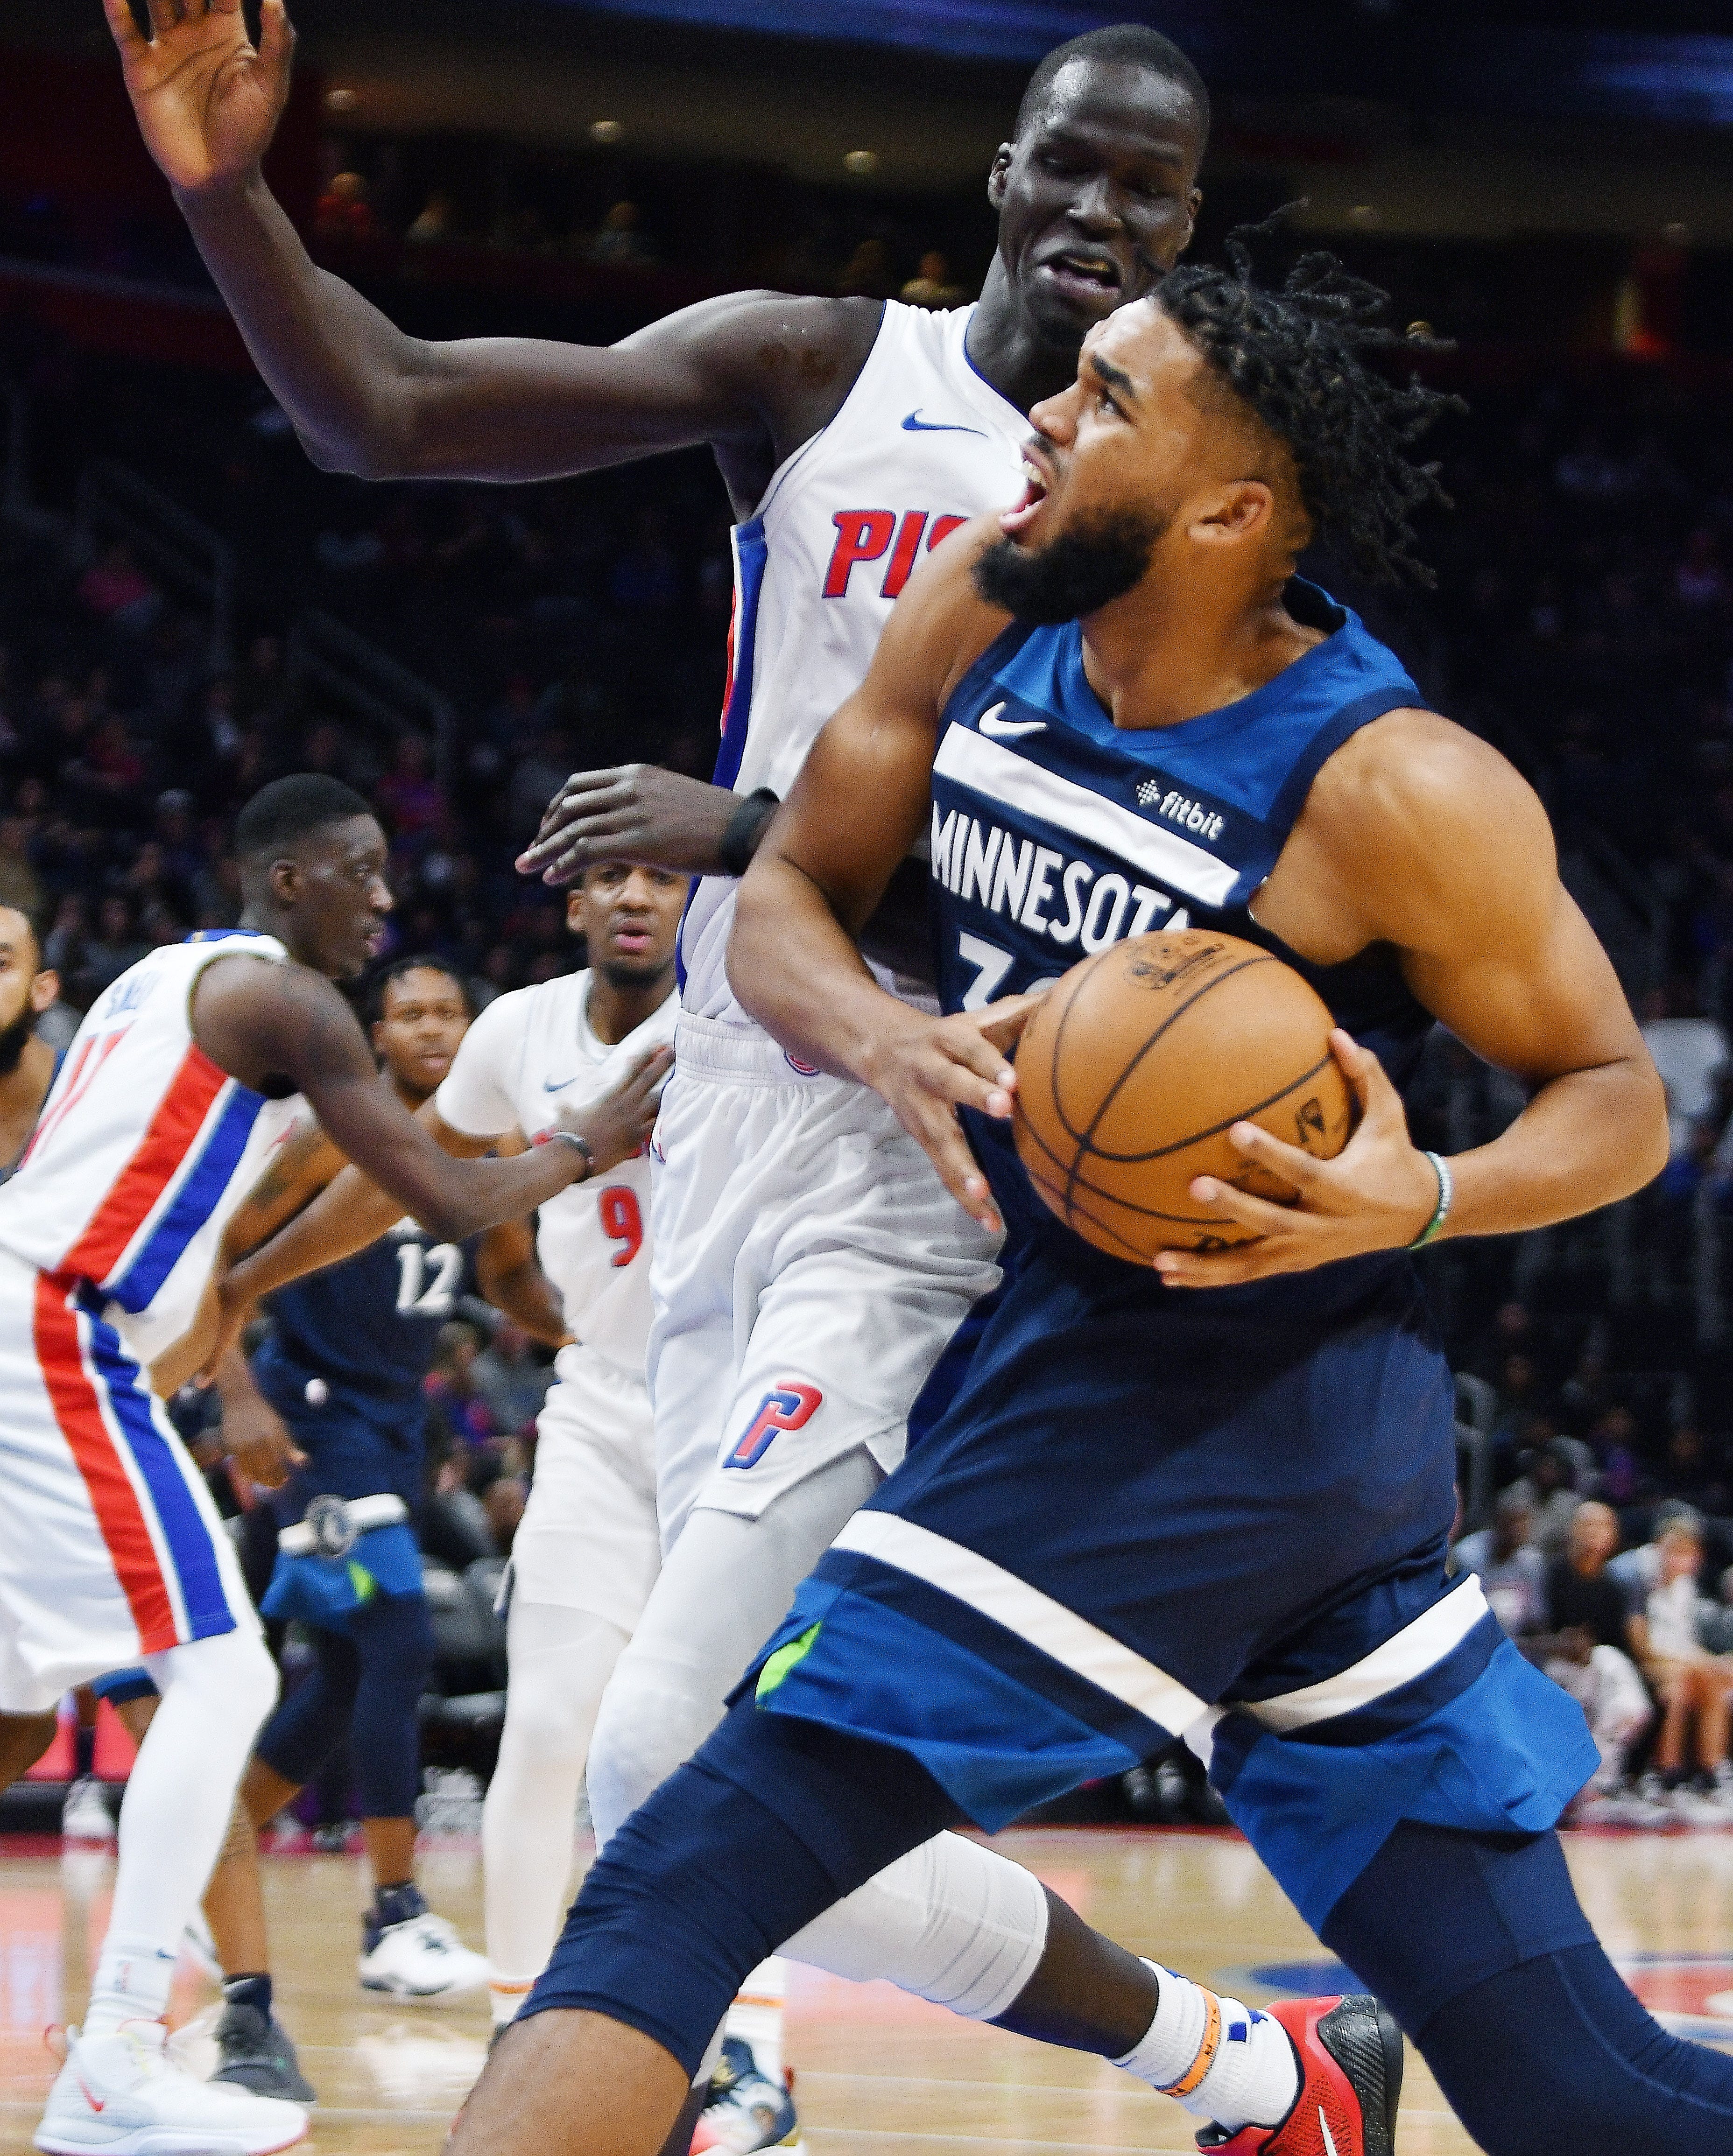 Timberwolves' Karl-Anthony Towns drives past Pistons' Thon Maker in the fourth quarter.